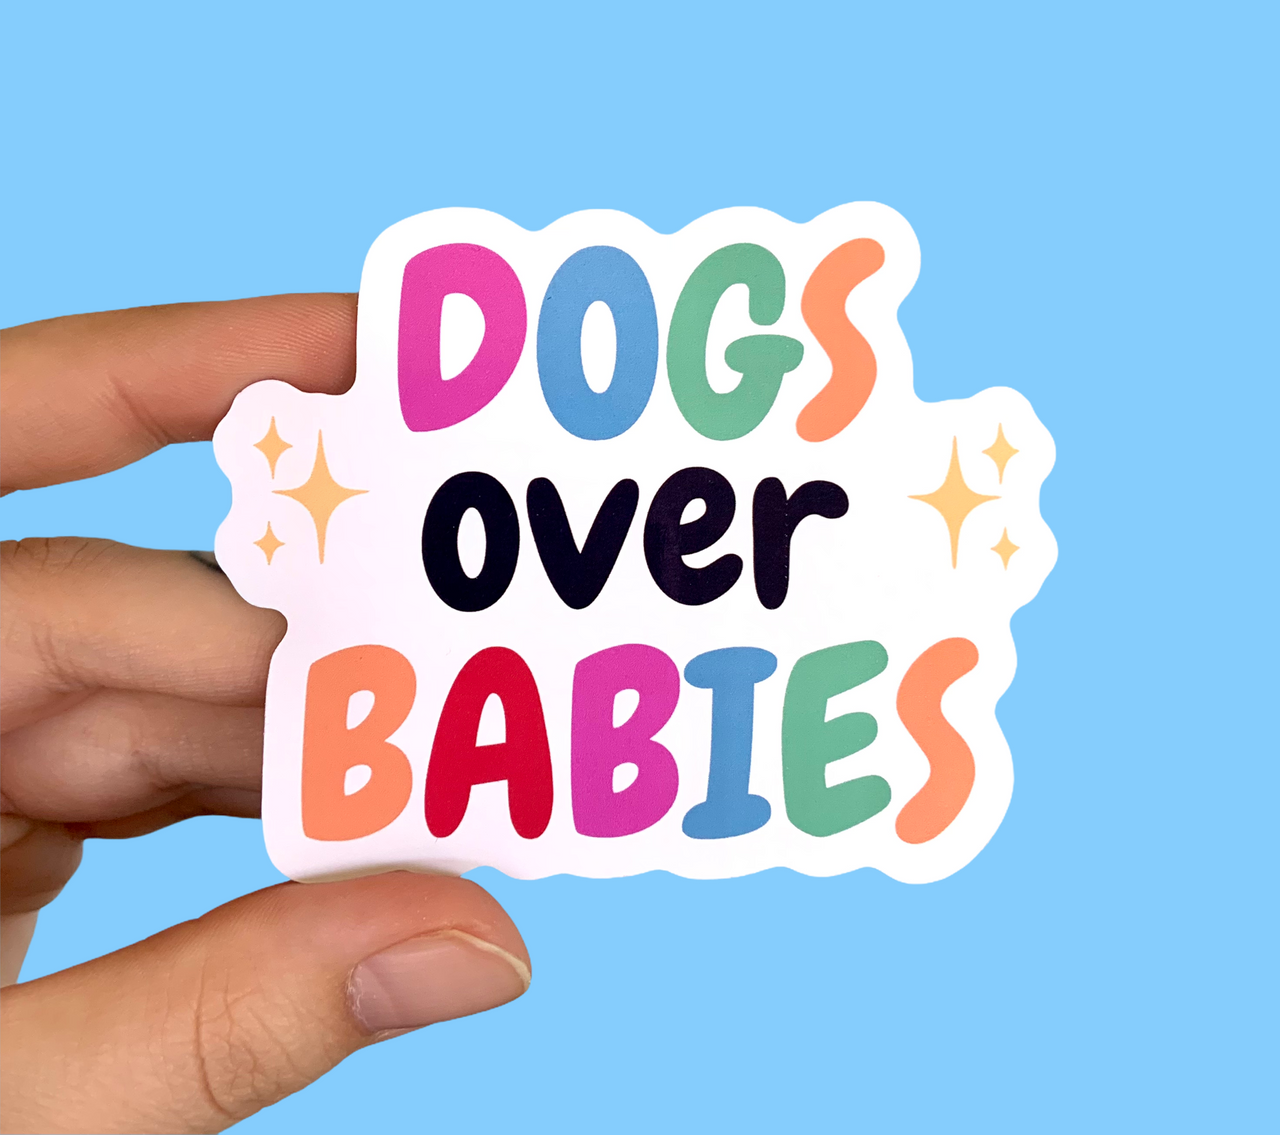 Dogs over babies (pack of 3 or 5 stickers)